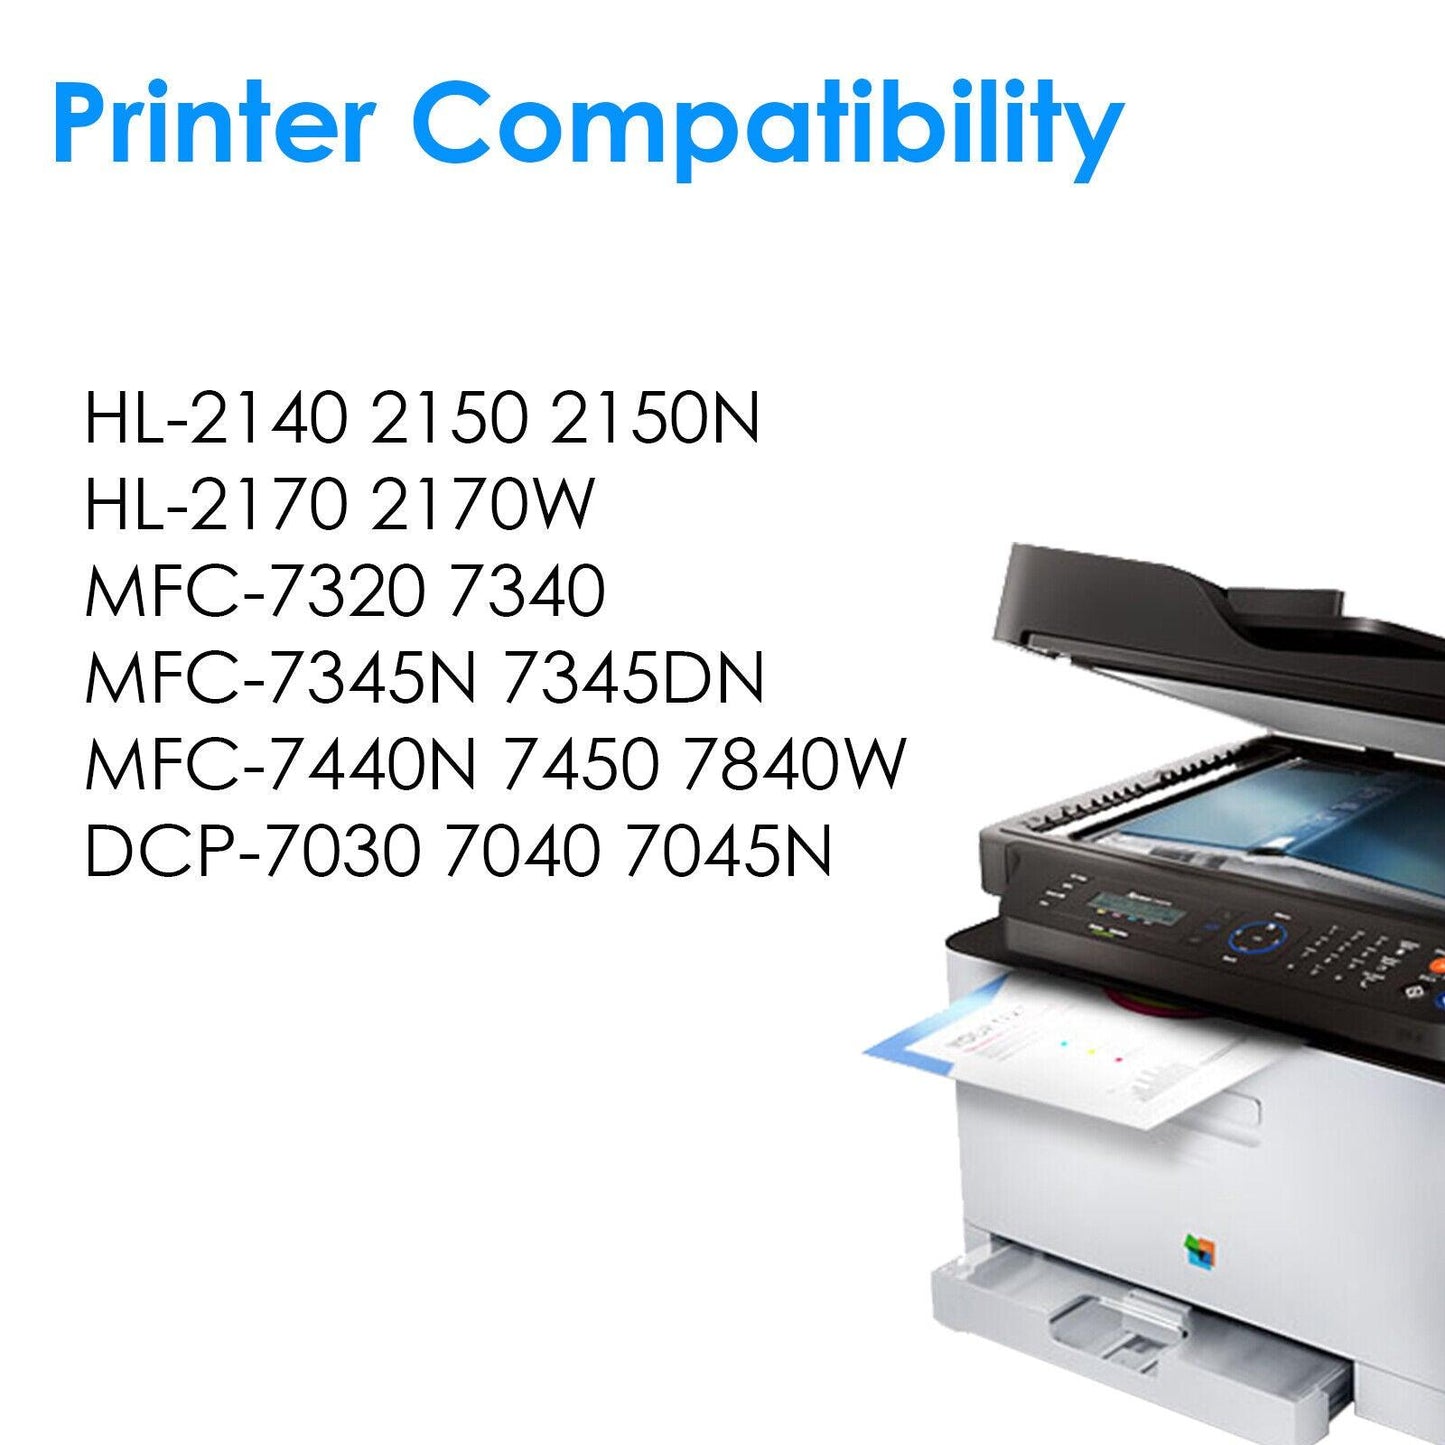 TN360 Toner DR360 Drum For Brother HL-2140 2170W MFC-7340 7840W DCP-7040 - Prinko